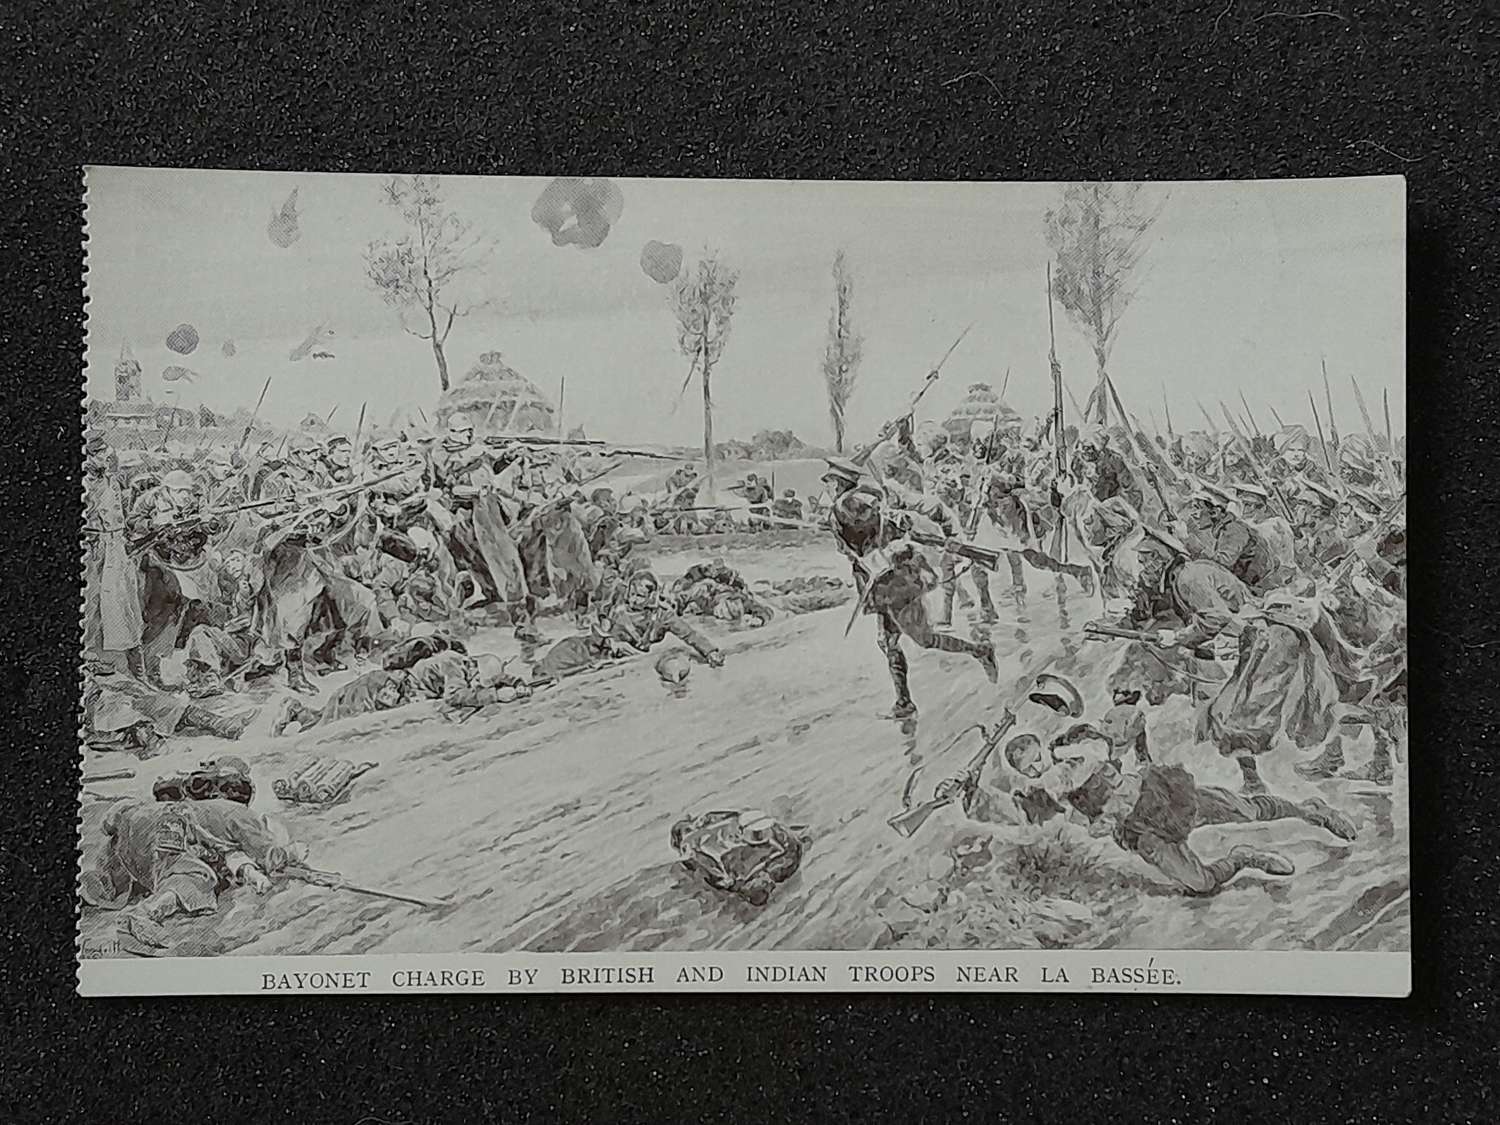 WWI Postcard Bayonet Charge By British And Indian Troops Near la Basse